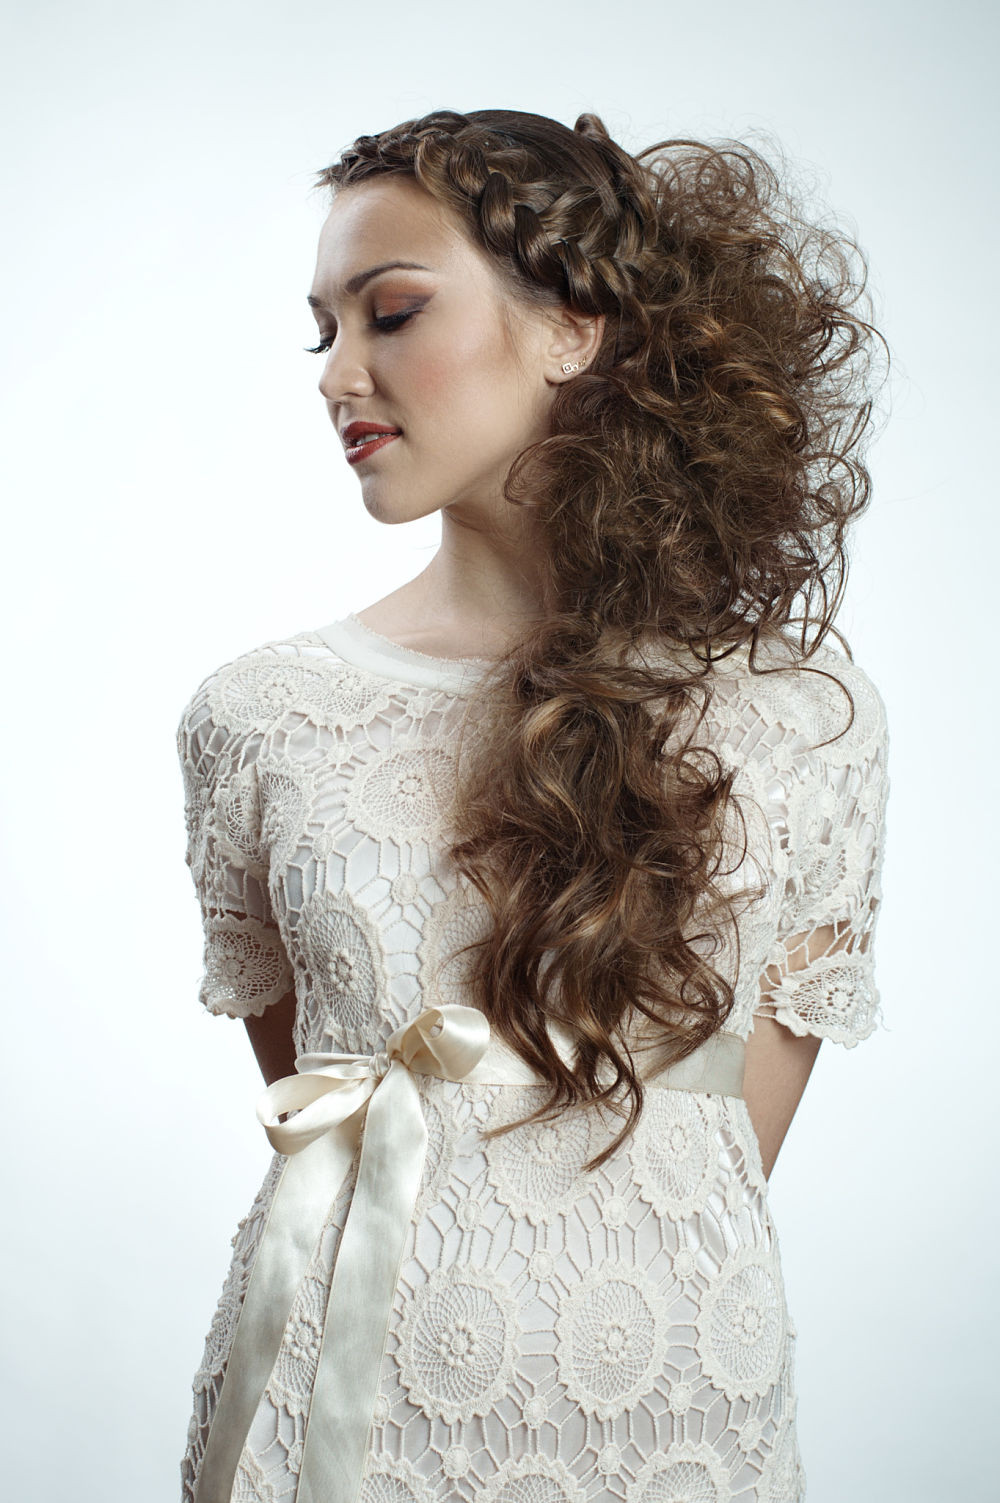 Prom Haircuts
 Let’s Turn Some Heads DIY Prom Hairstyle ´Dos For Curly